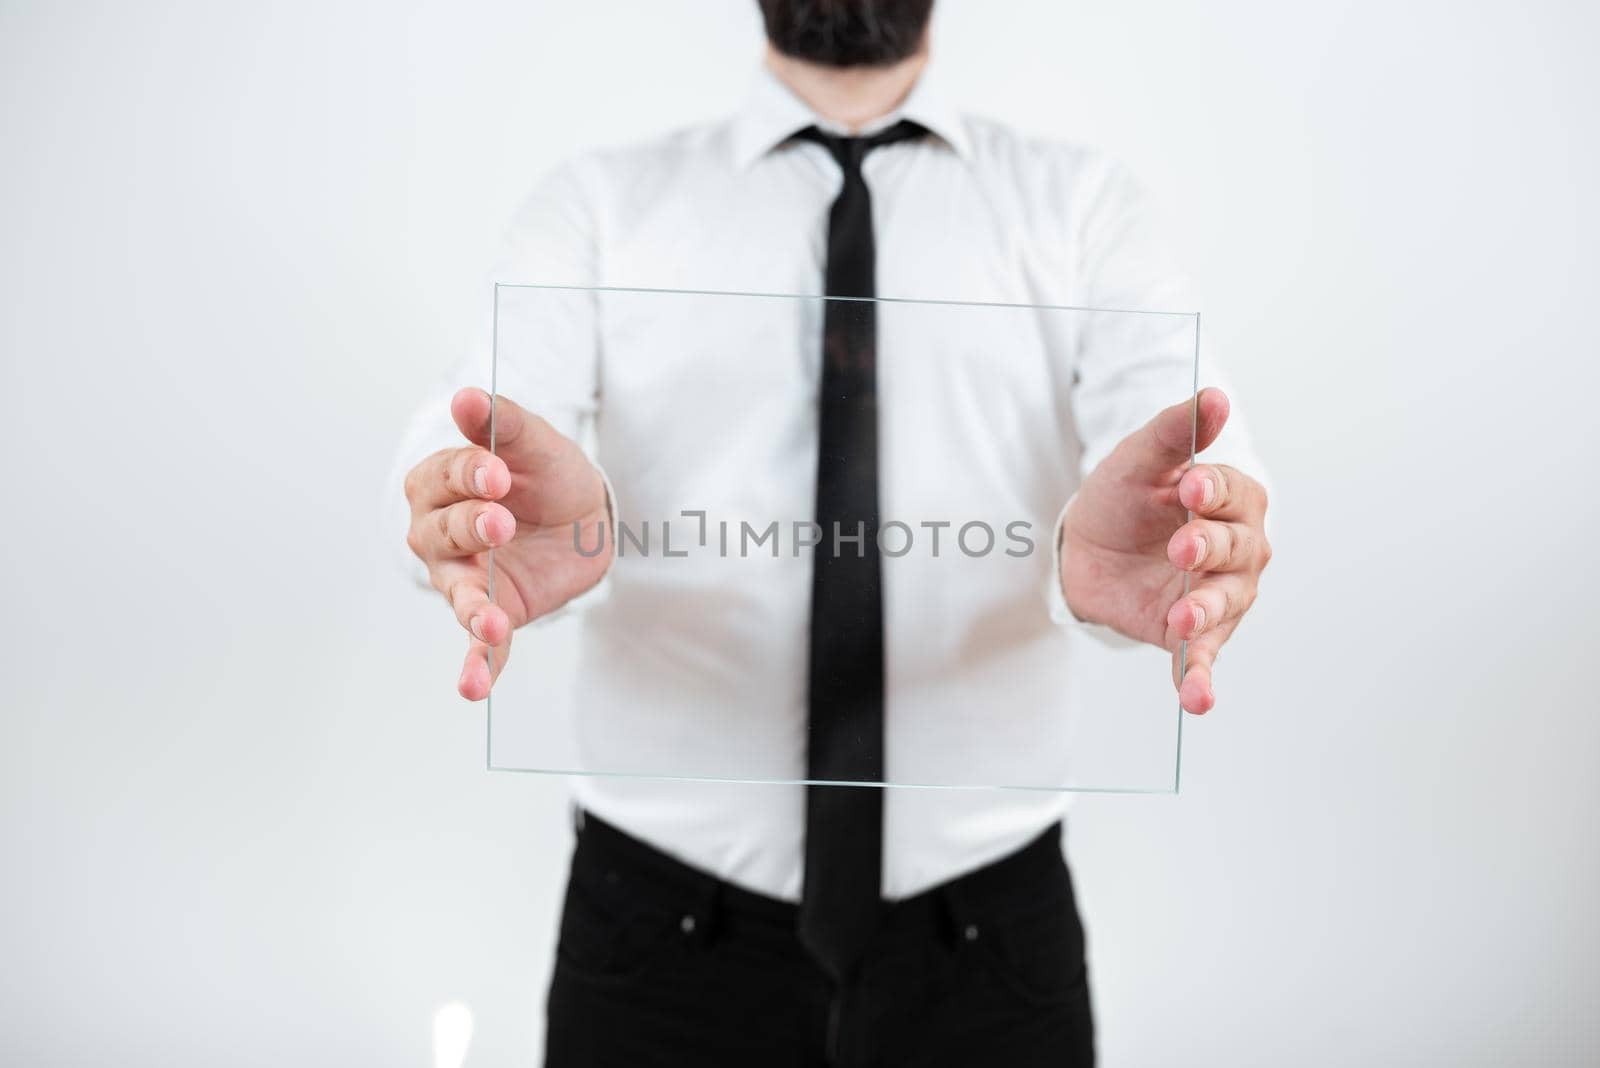 Businessman Holding Glass Showing New Ideas To Achieve Goals.